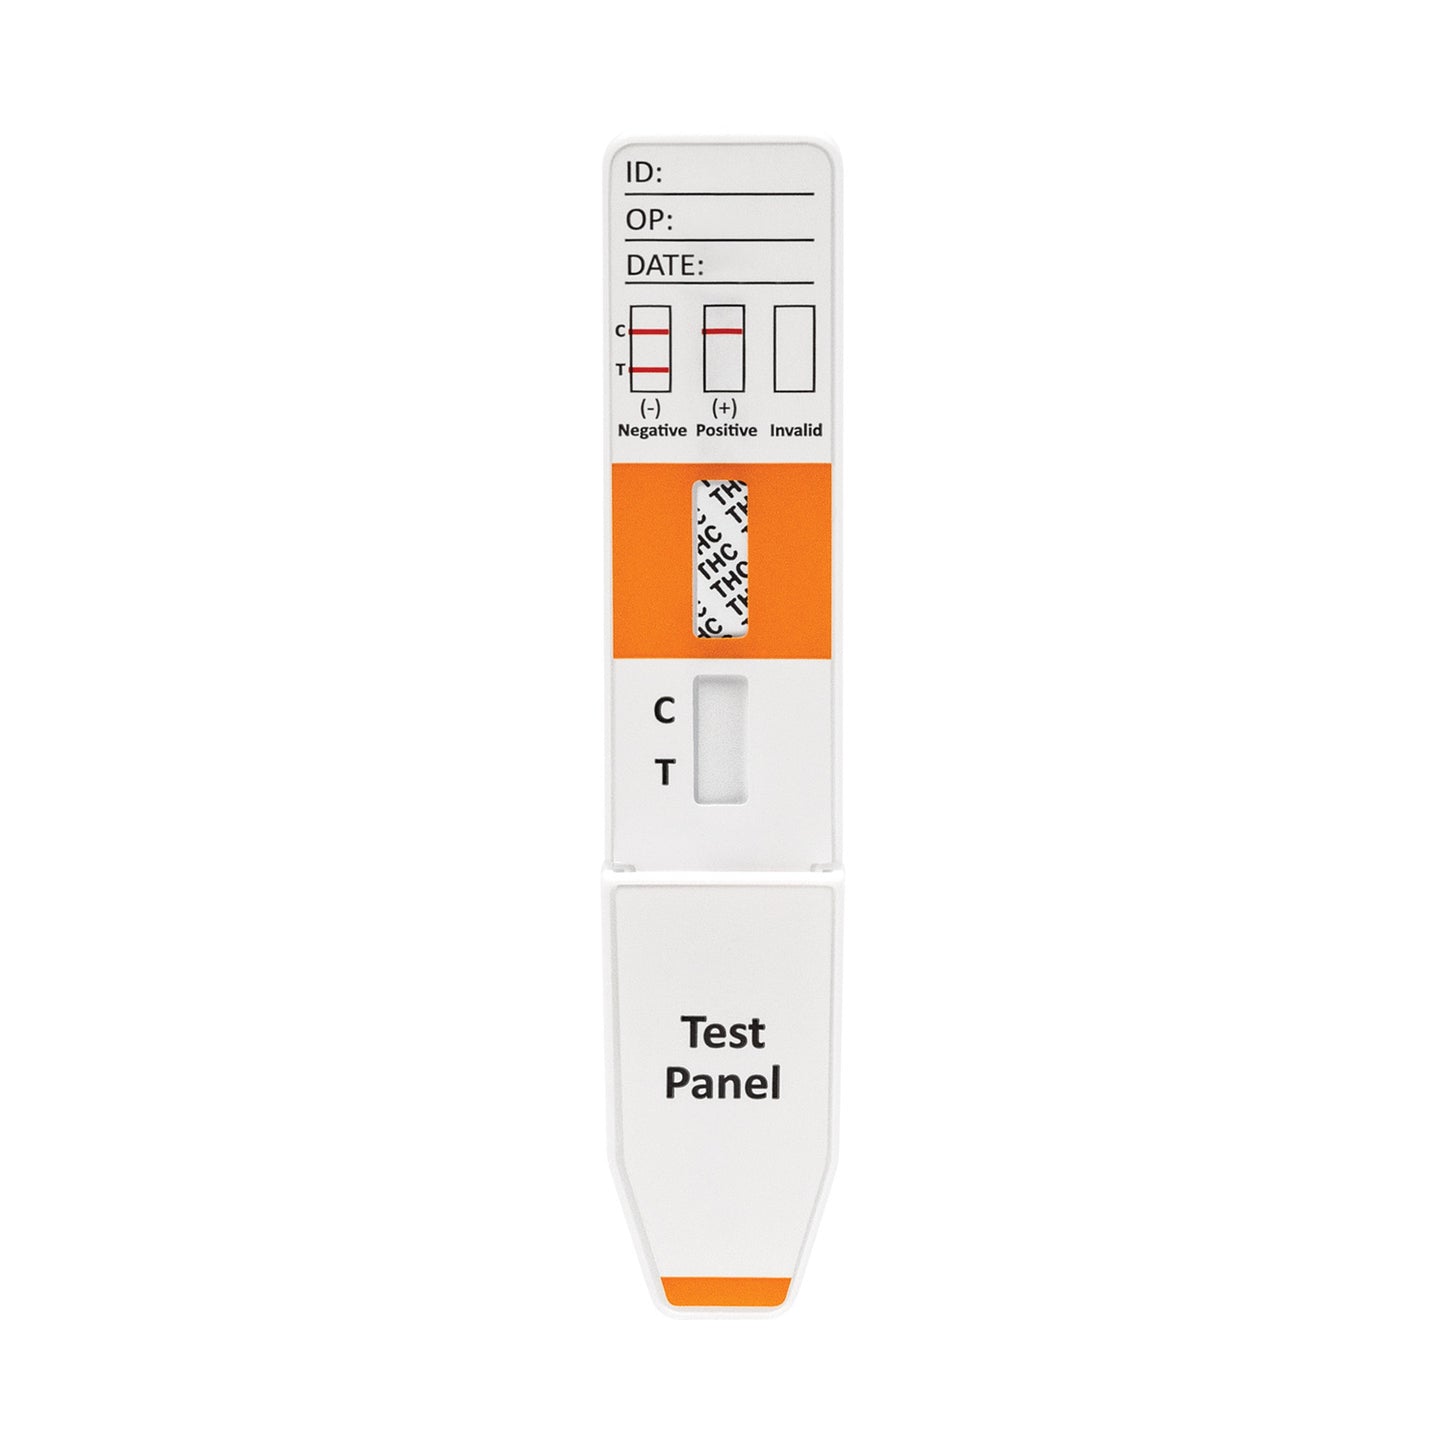 Surestep™ Powder Test Drug Screen Panel (Bup) (Image Differs From Product)